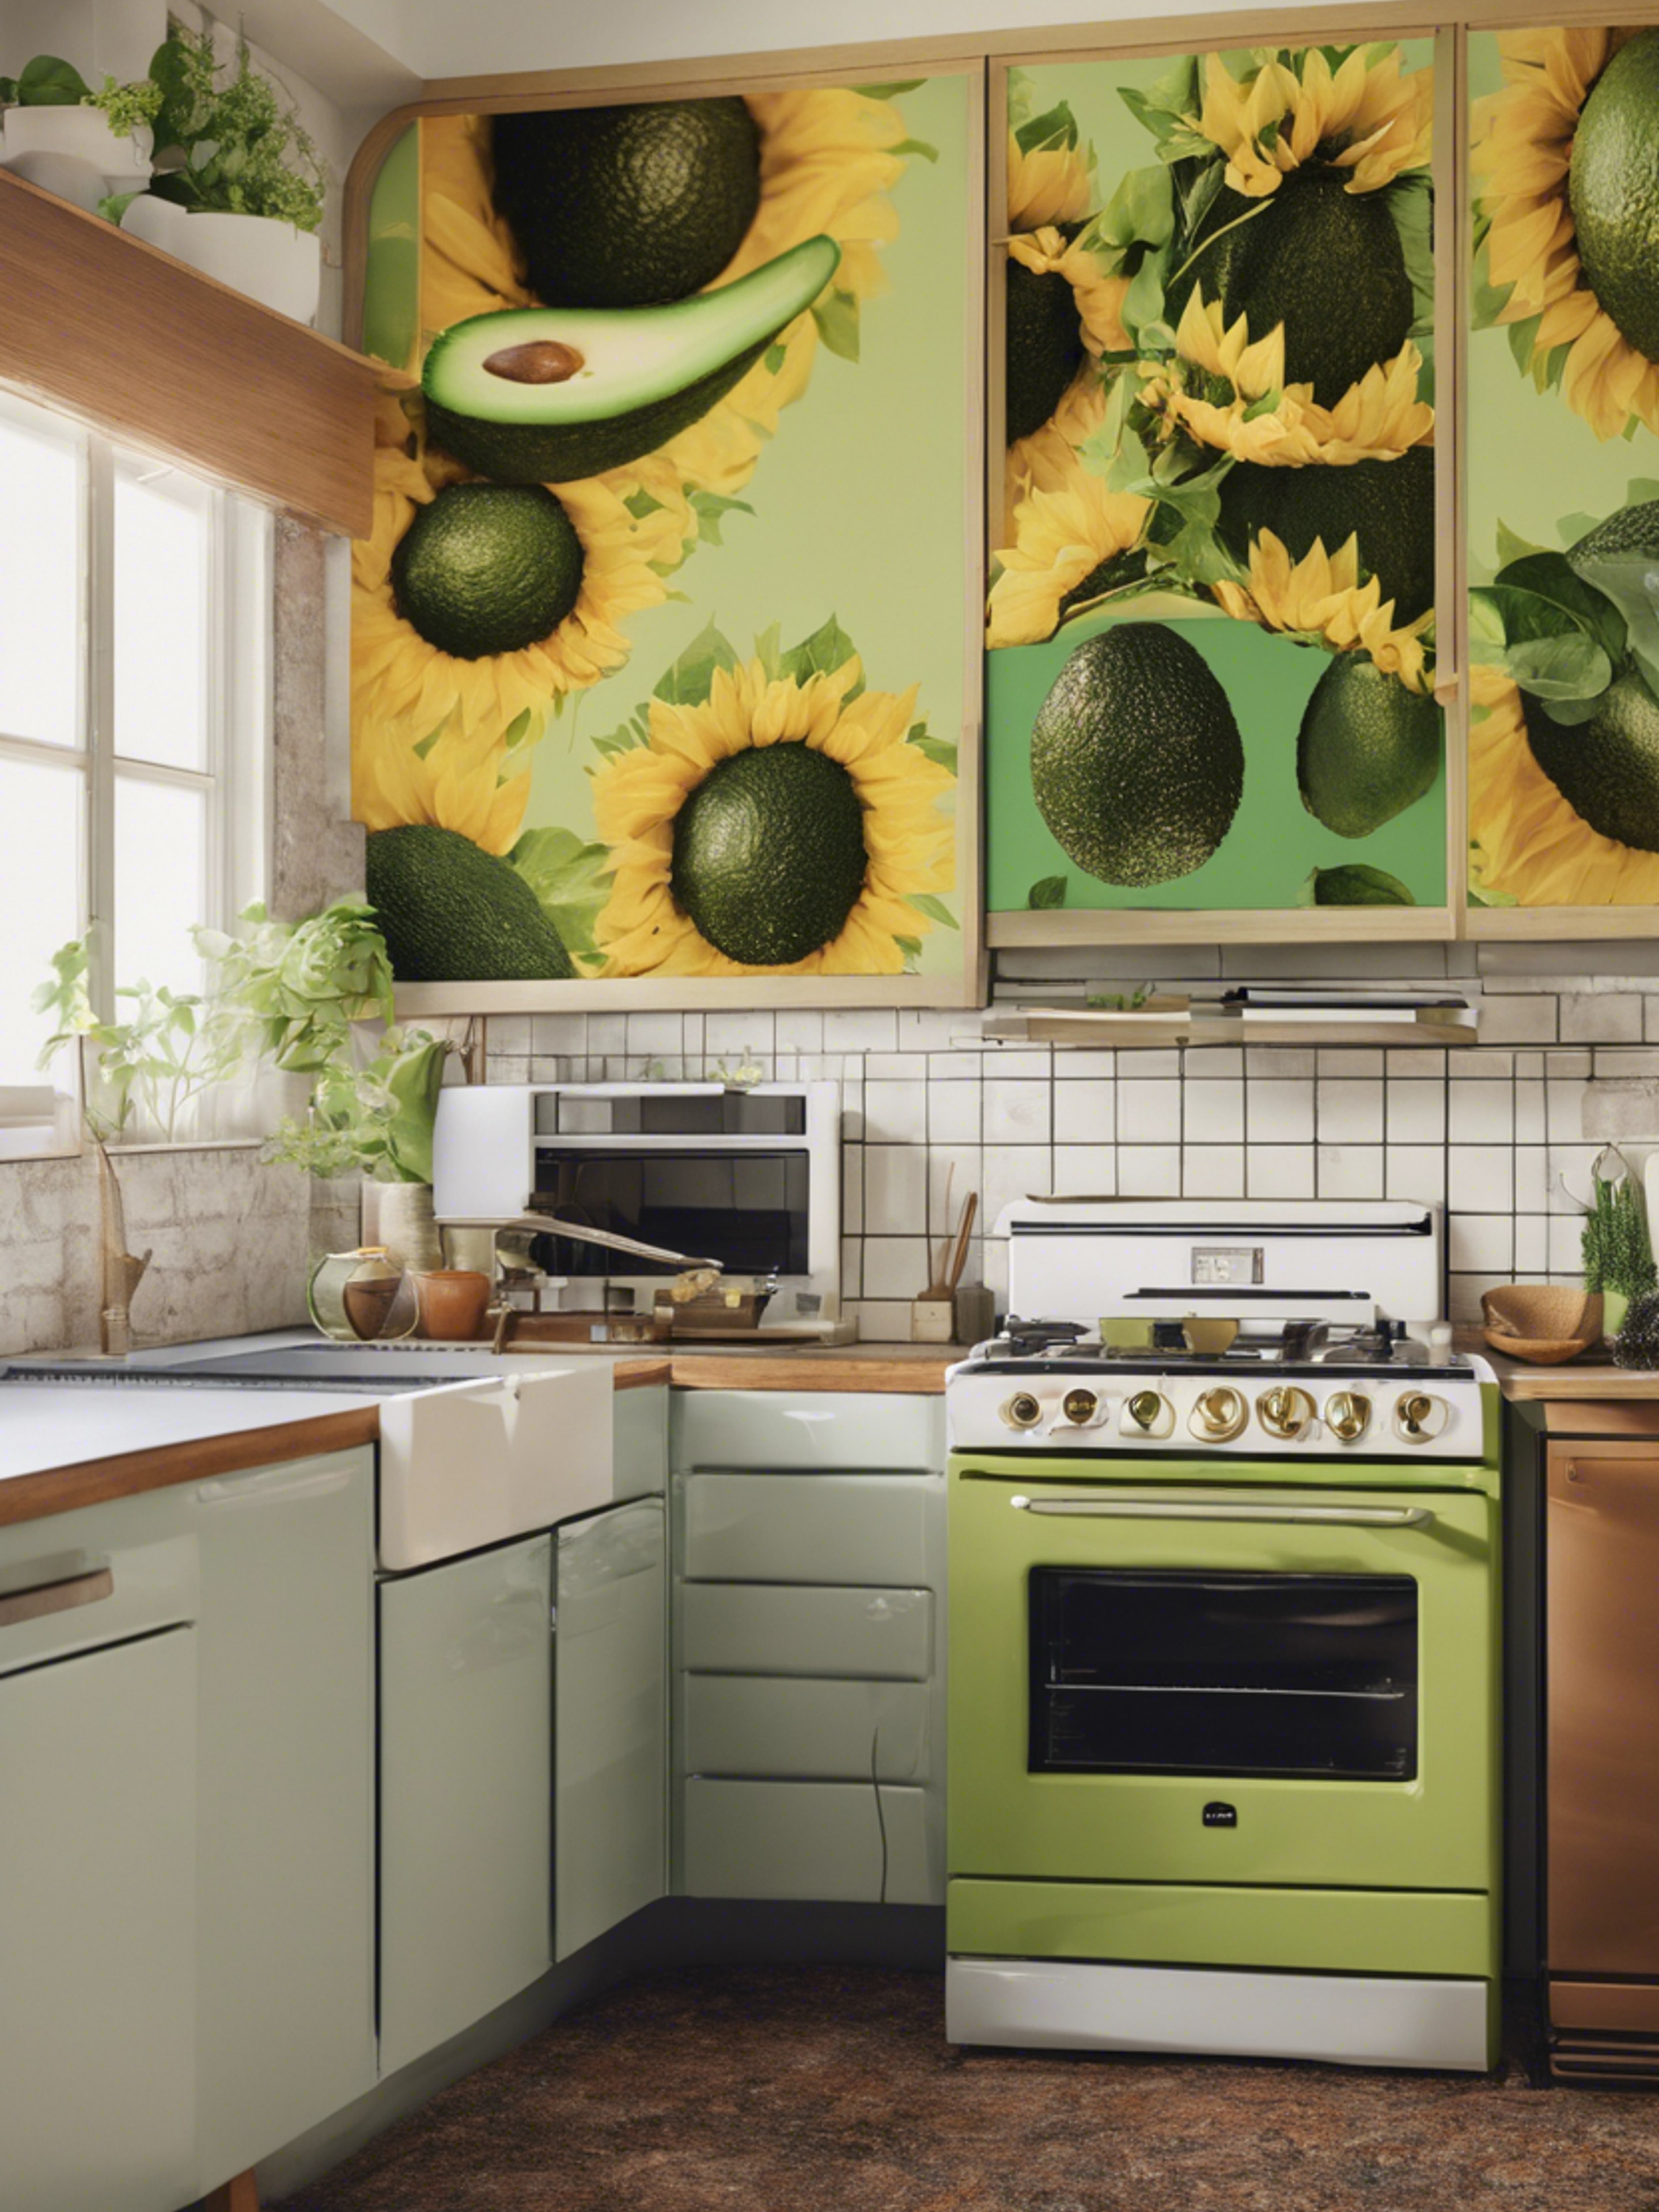 A 70s kitchen with avocado green appliances and oversized sunflower prints Tapeta[58674ee3cd464da7b0a1]